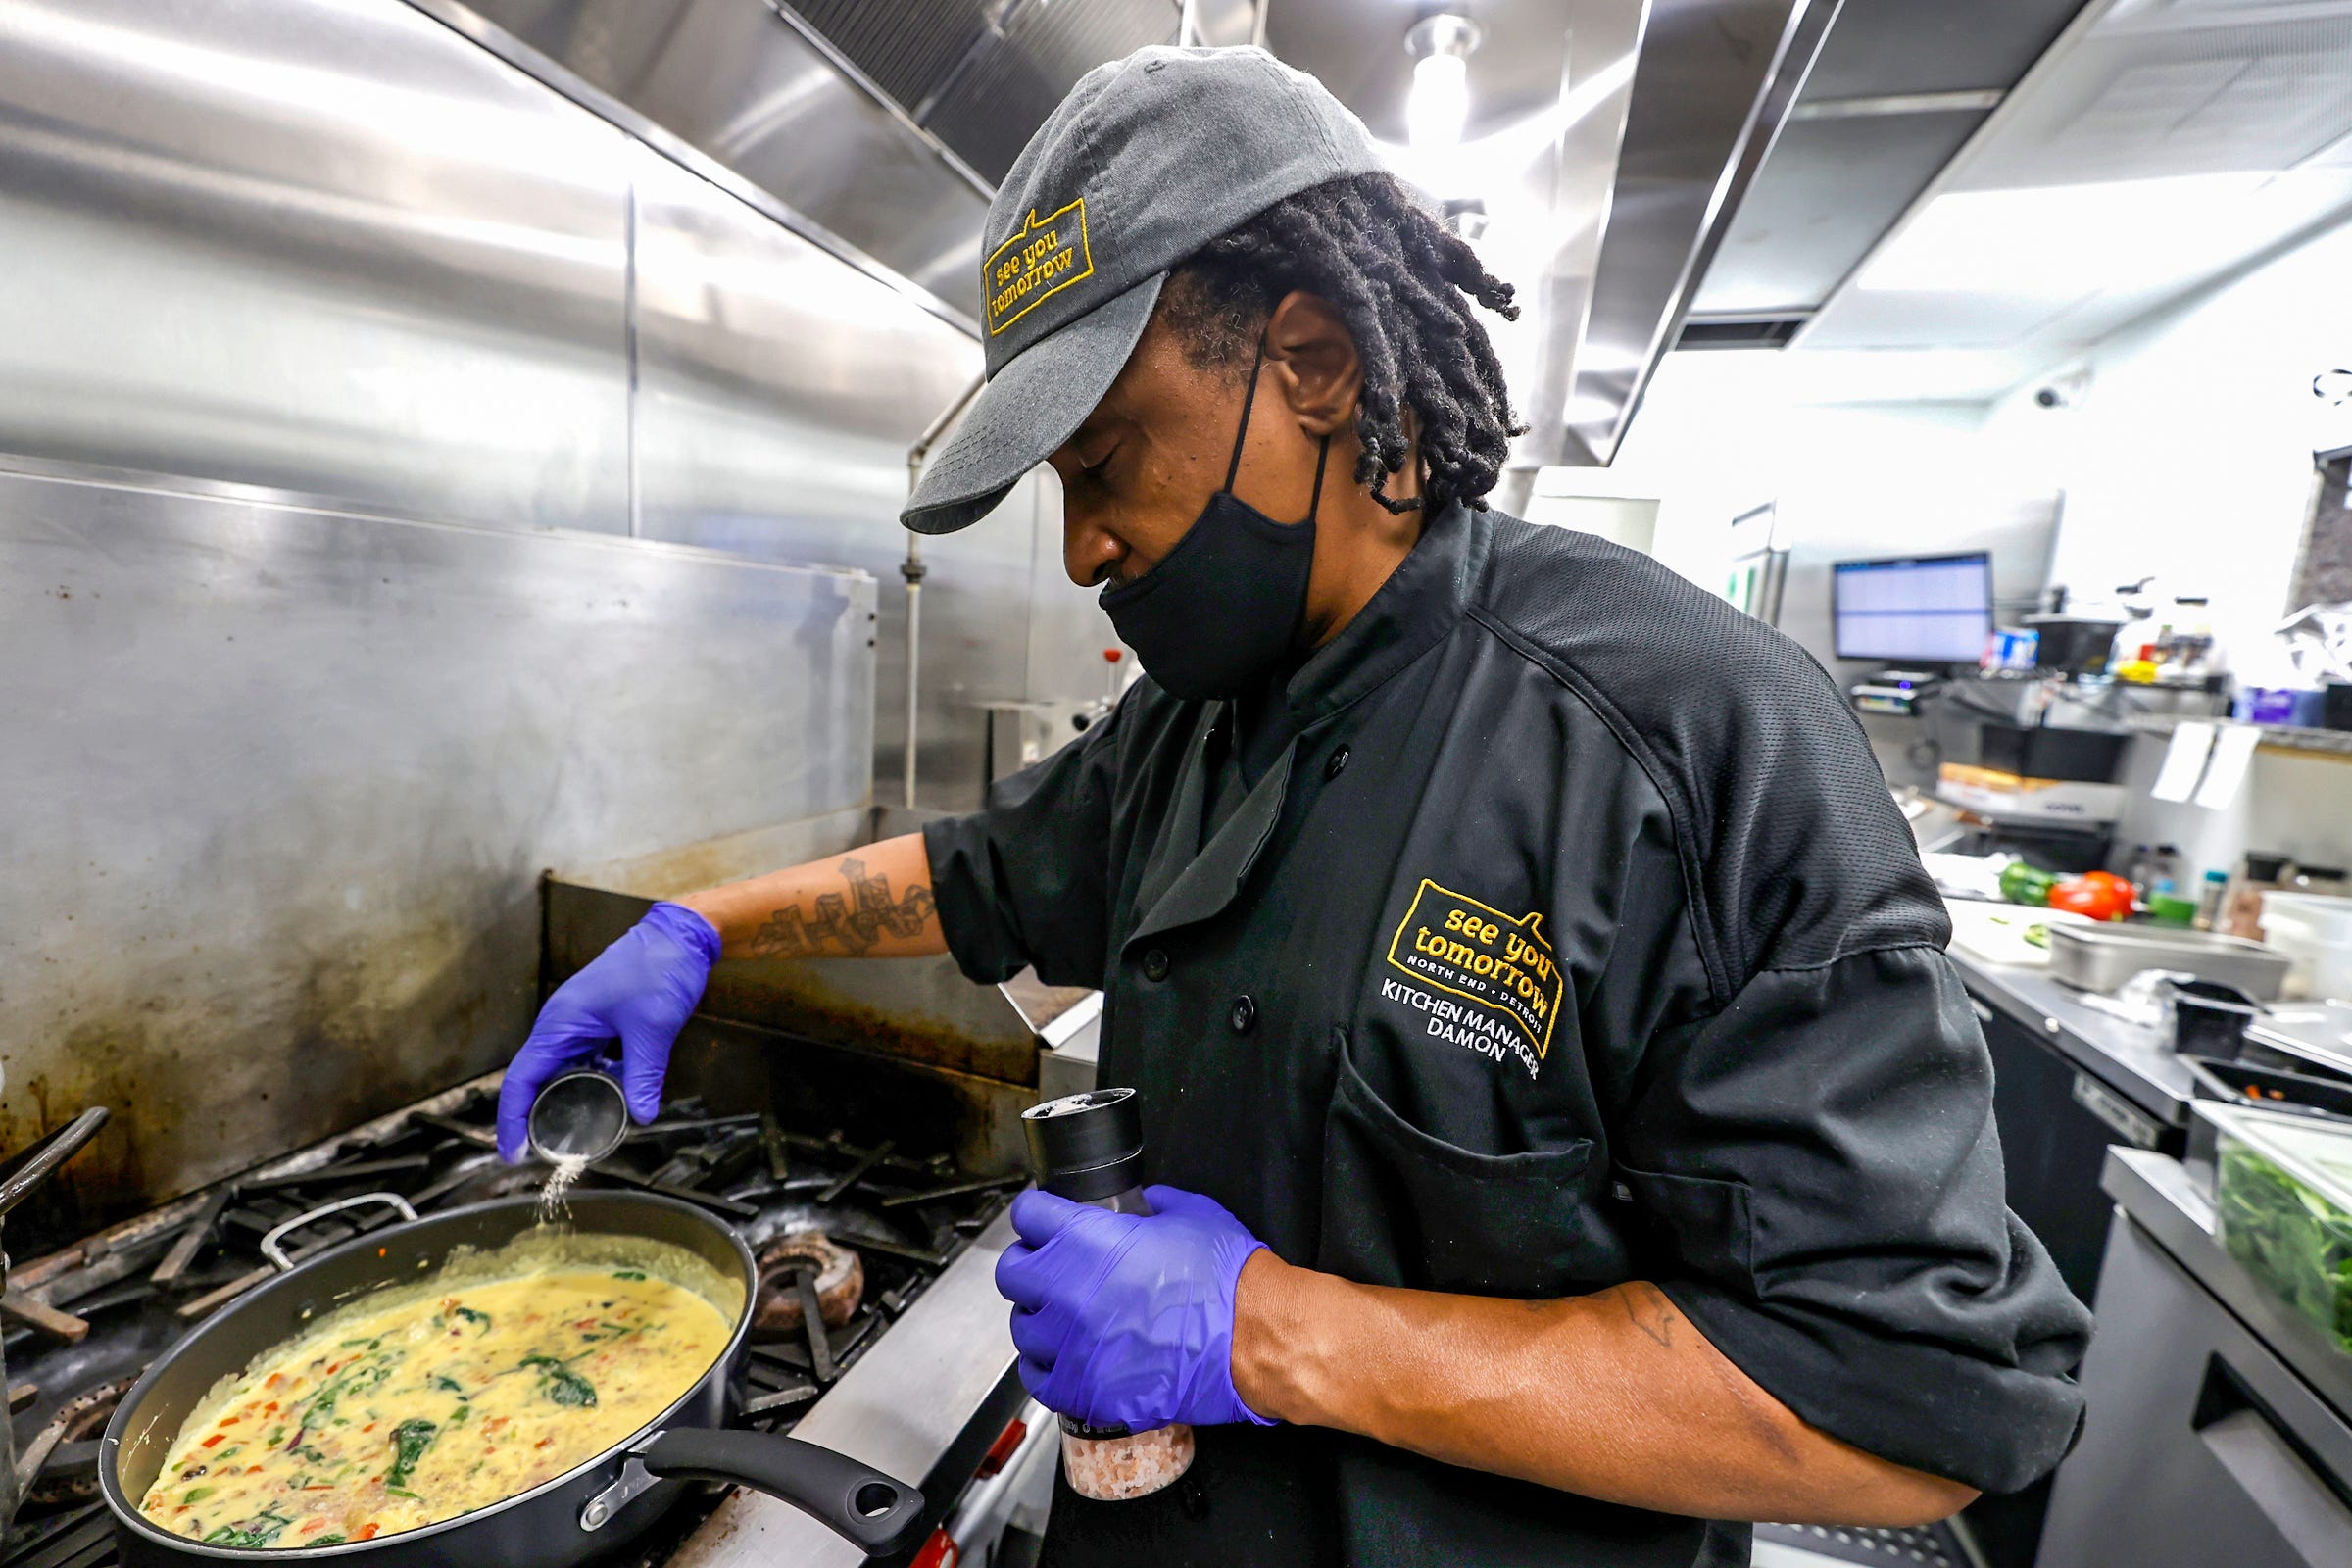 Damon Cann is the kitchen manager at See You Tomorrow, a restaurant on Woodward avenue in New Center Detroit, and works at scrambling eggs before they open at 8 a.m. on Wed., Nov 30, 2022.
Cann was a cook at a Birmingham restaurant before coming to work at See You Tomorrow, not far from where he grew up.